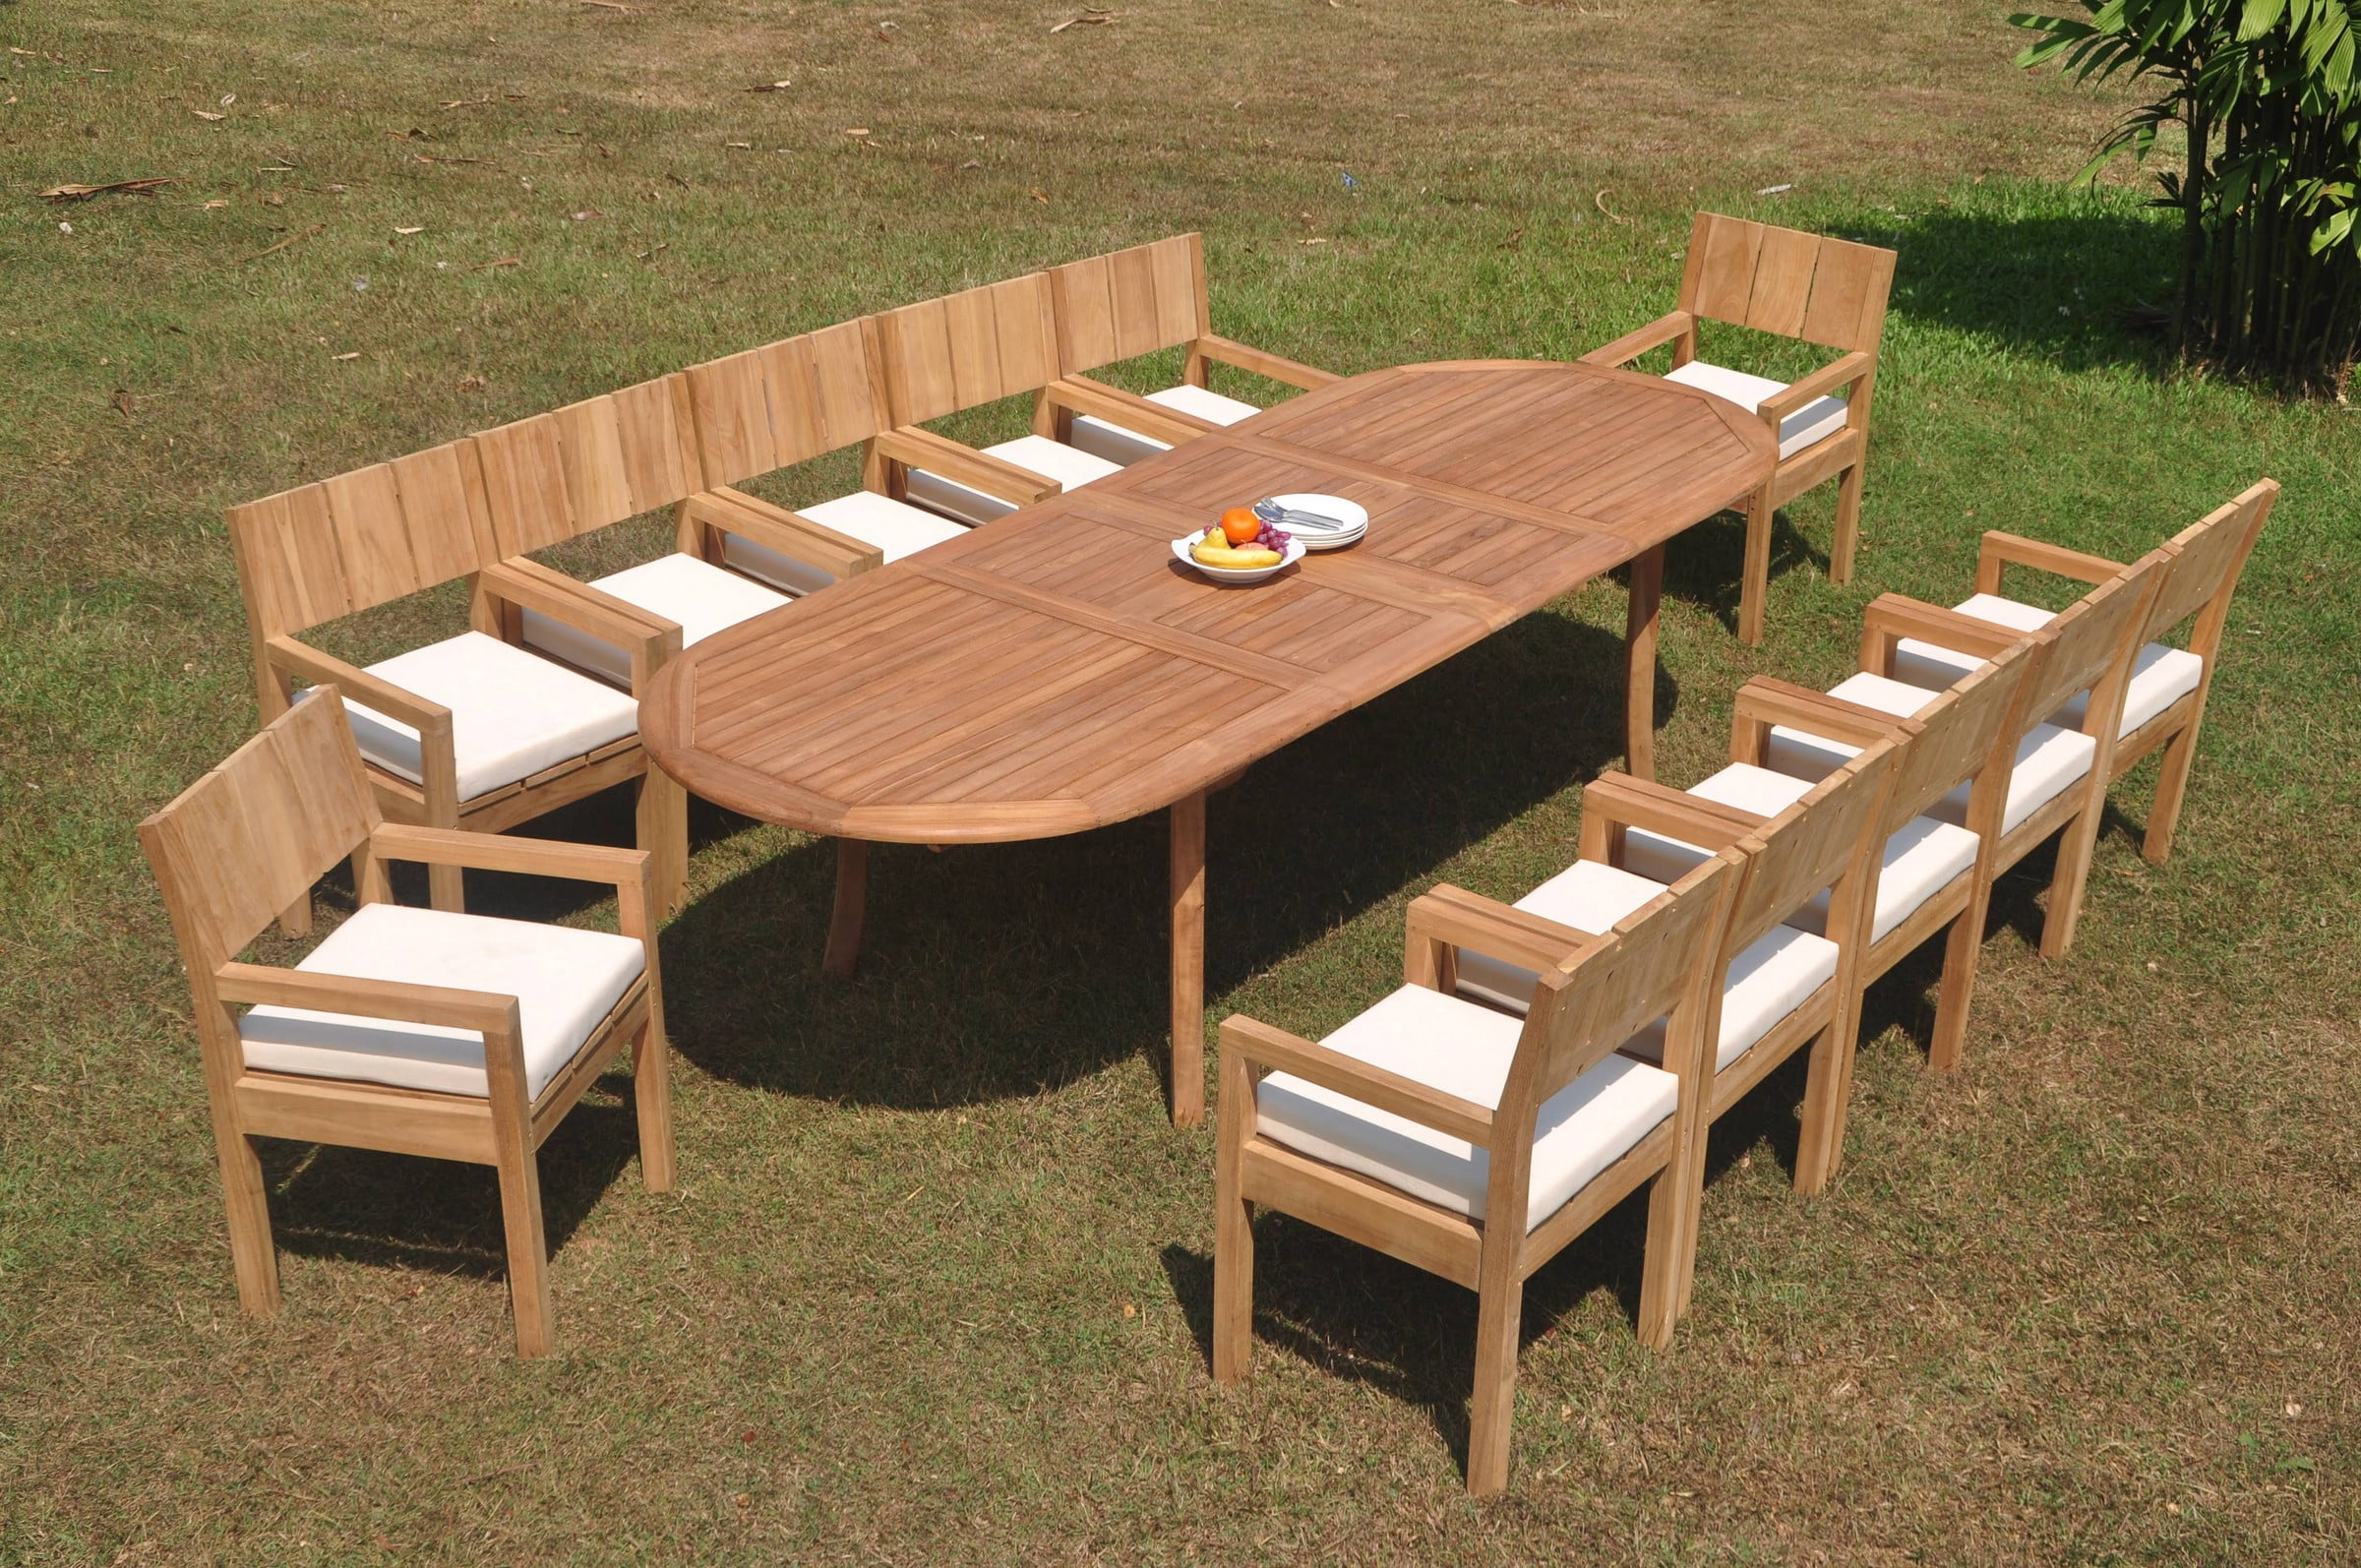 large 12 seater dining table Ok, i know i don't have a big family, but i like entertaining guests